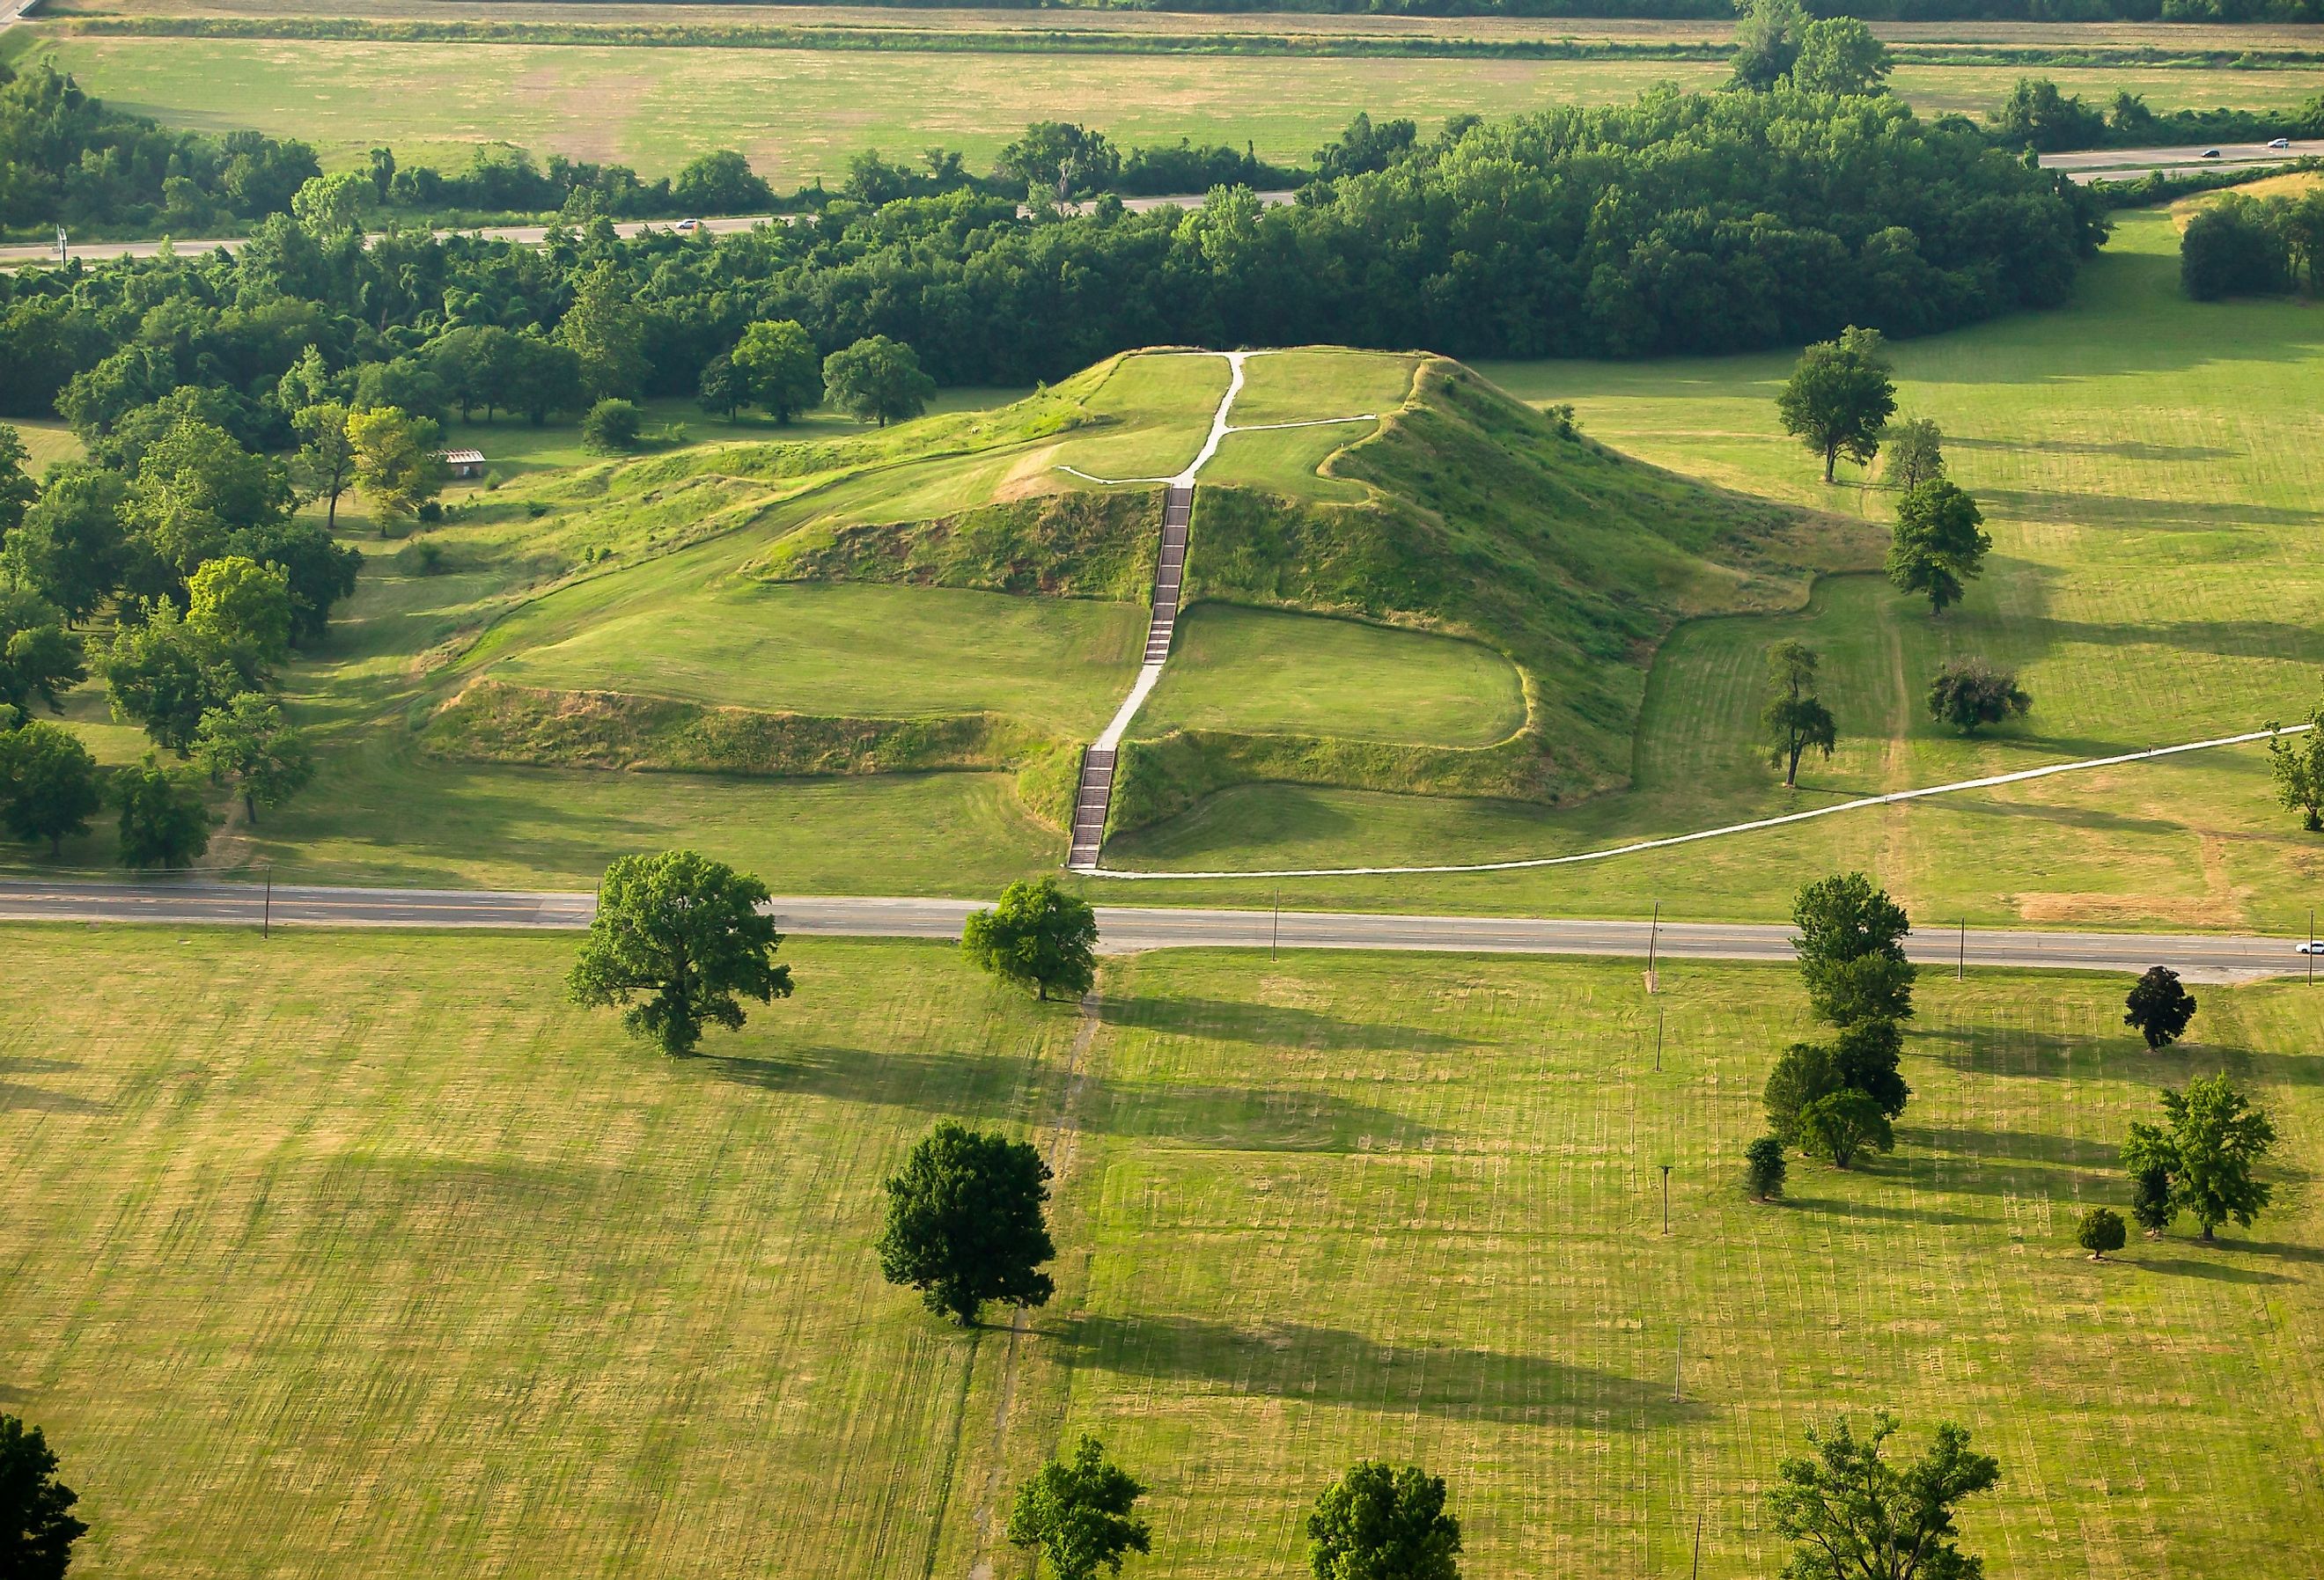 Aerial view of ancient Native American burial mound Cahokia Mounds, Illinois.